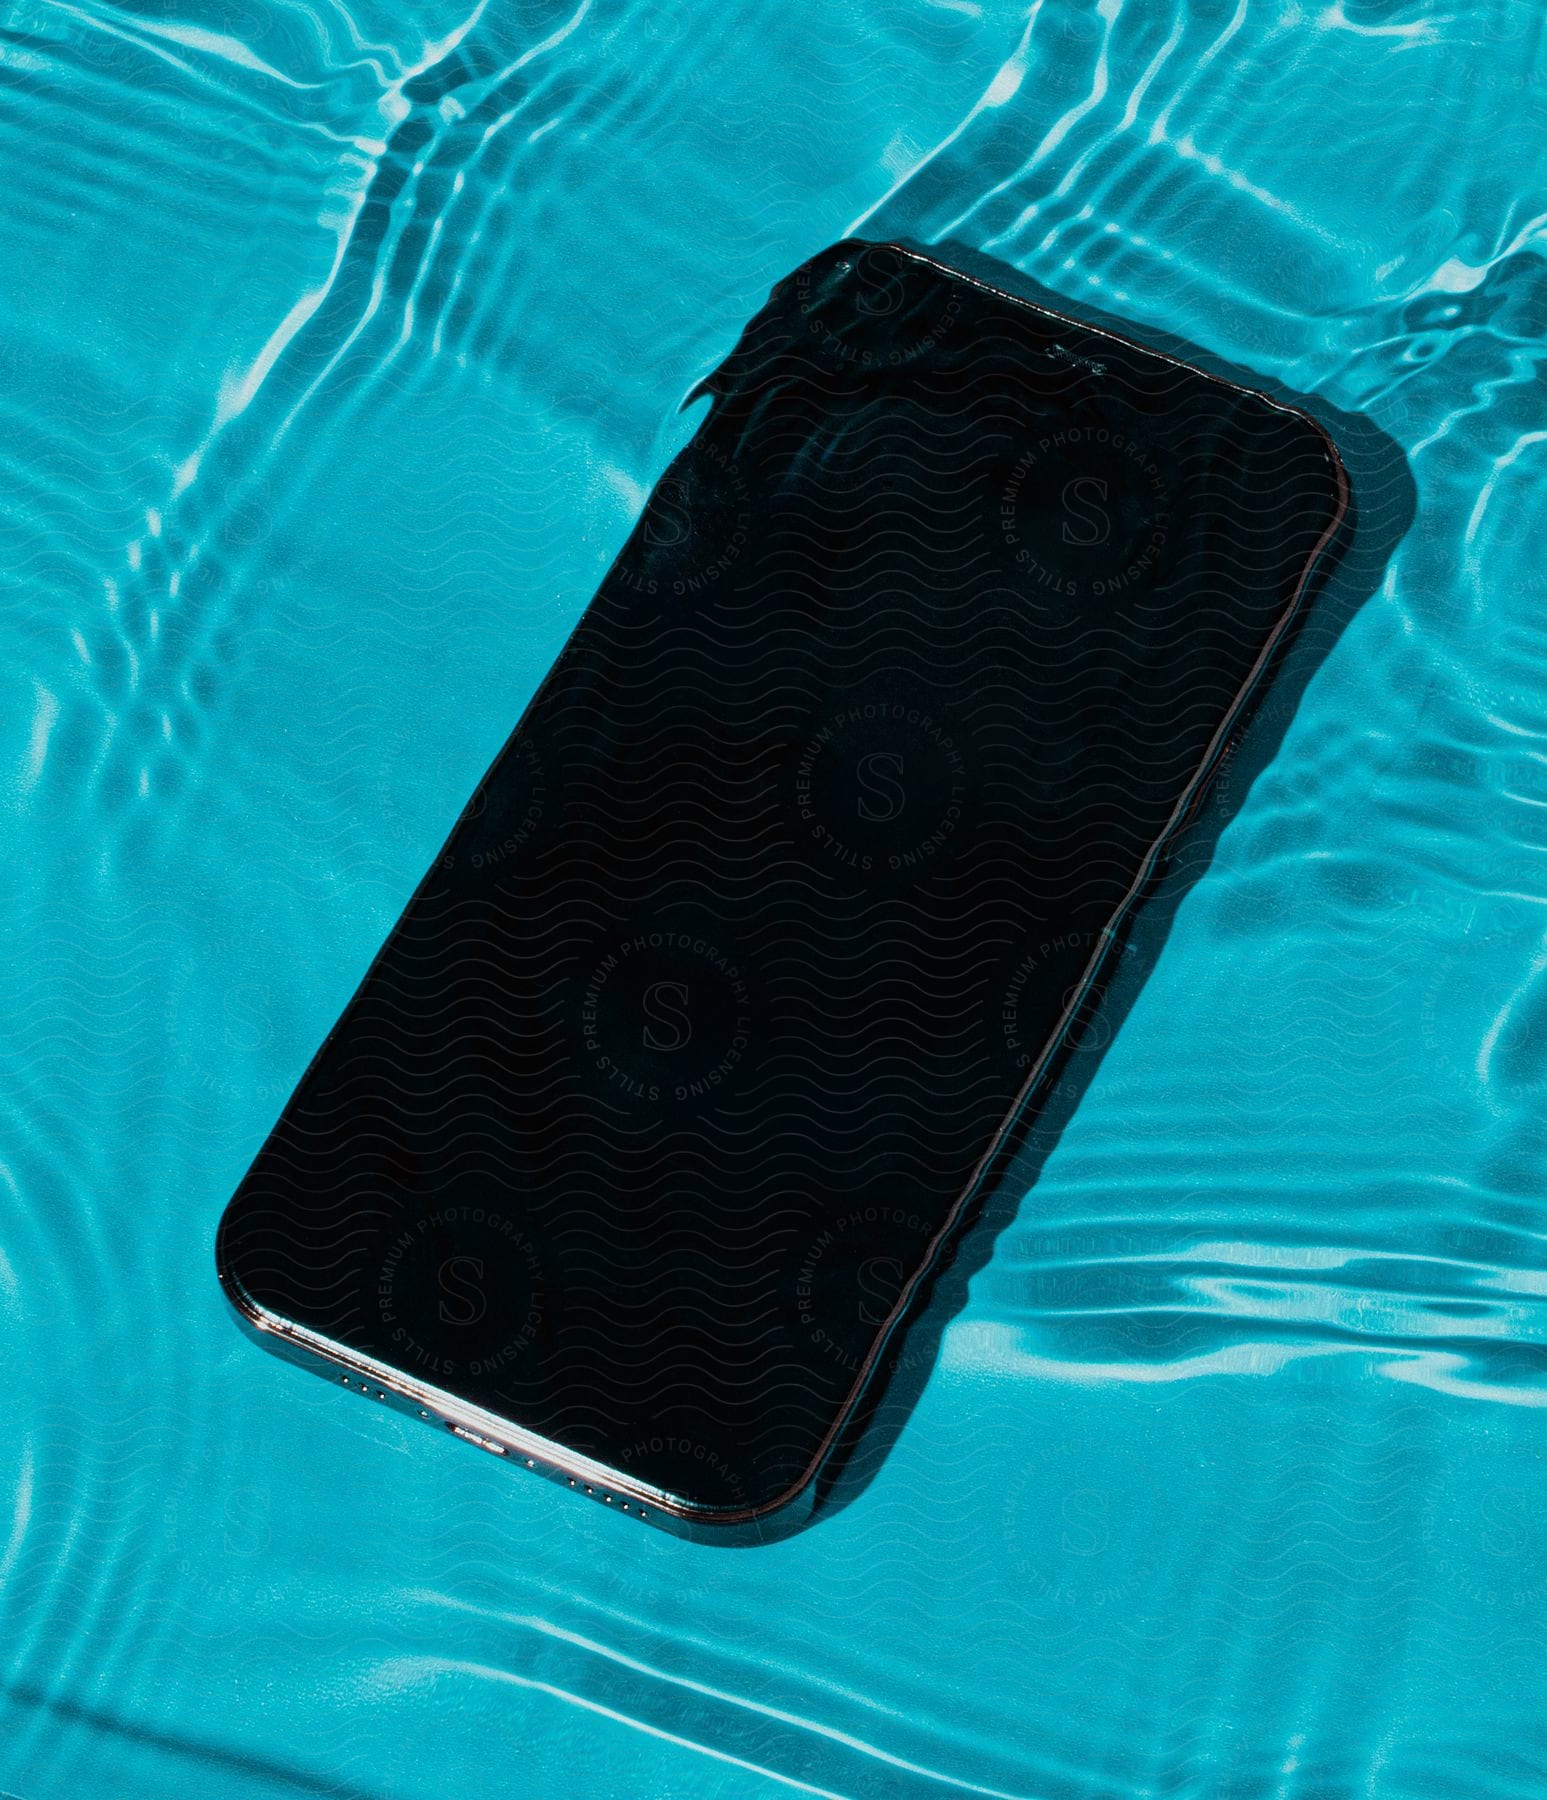 A phone sitting on top of some water in a pool.